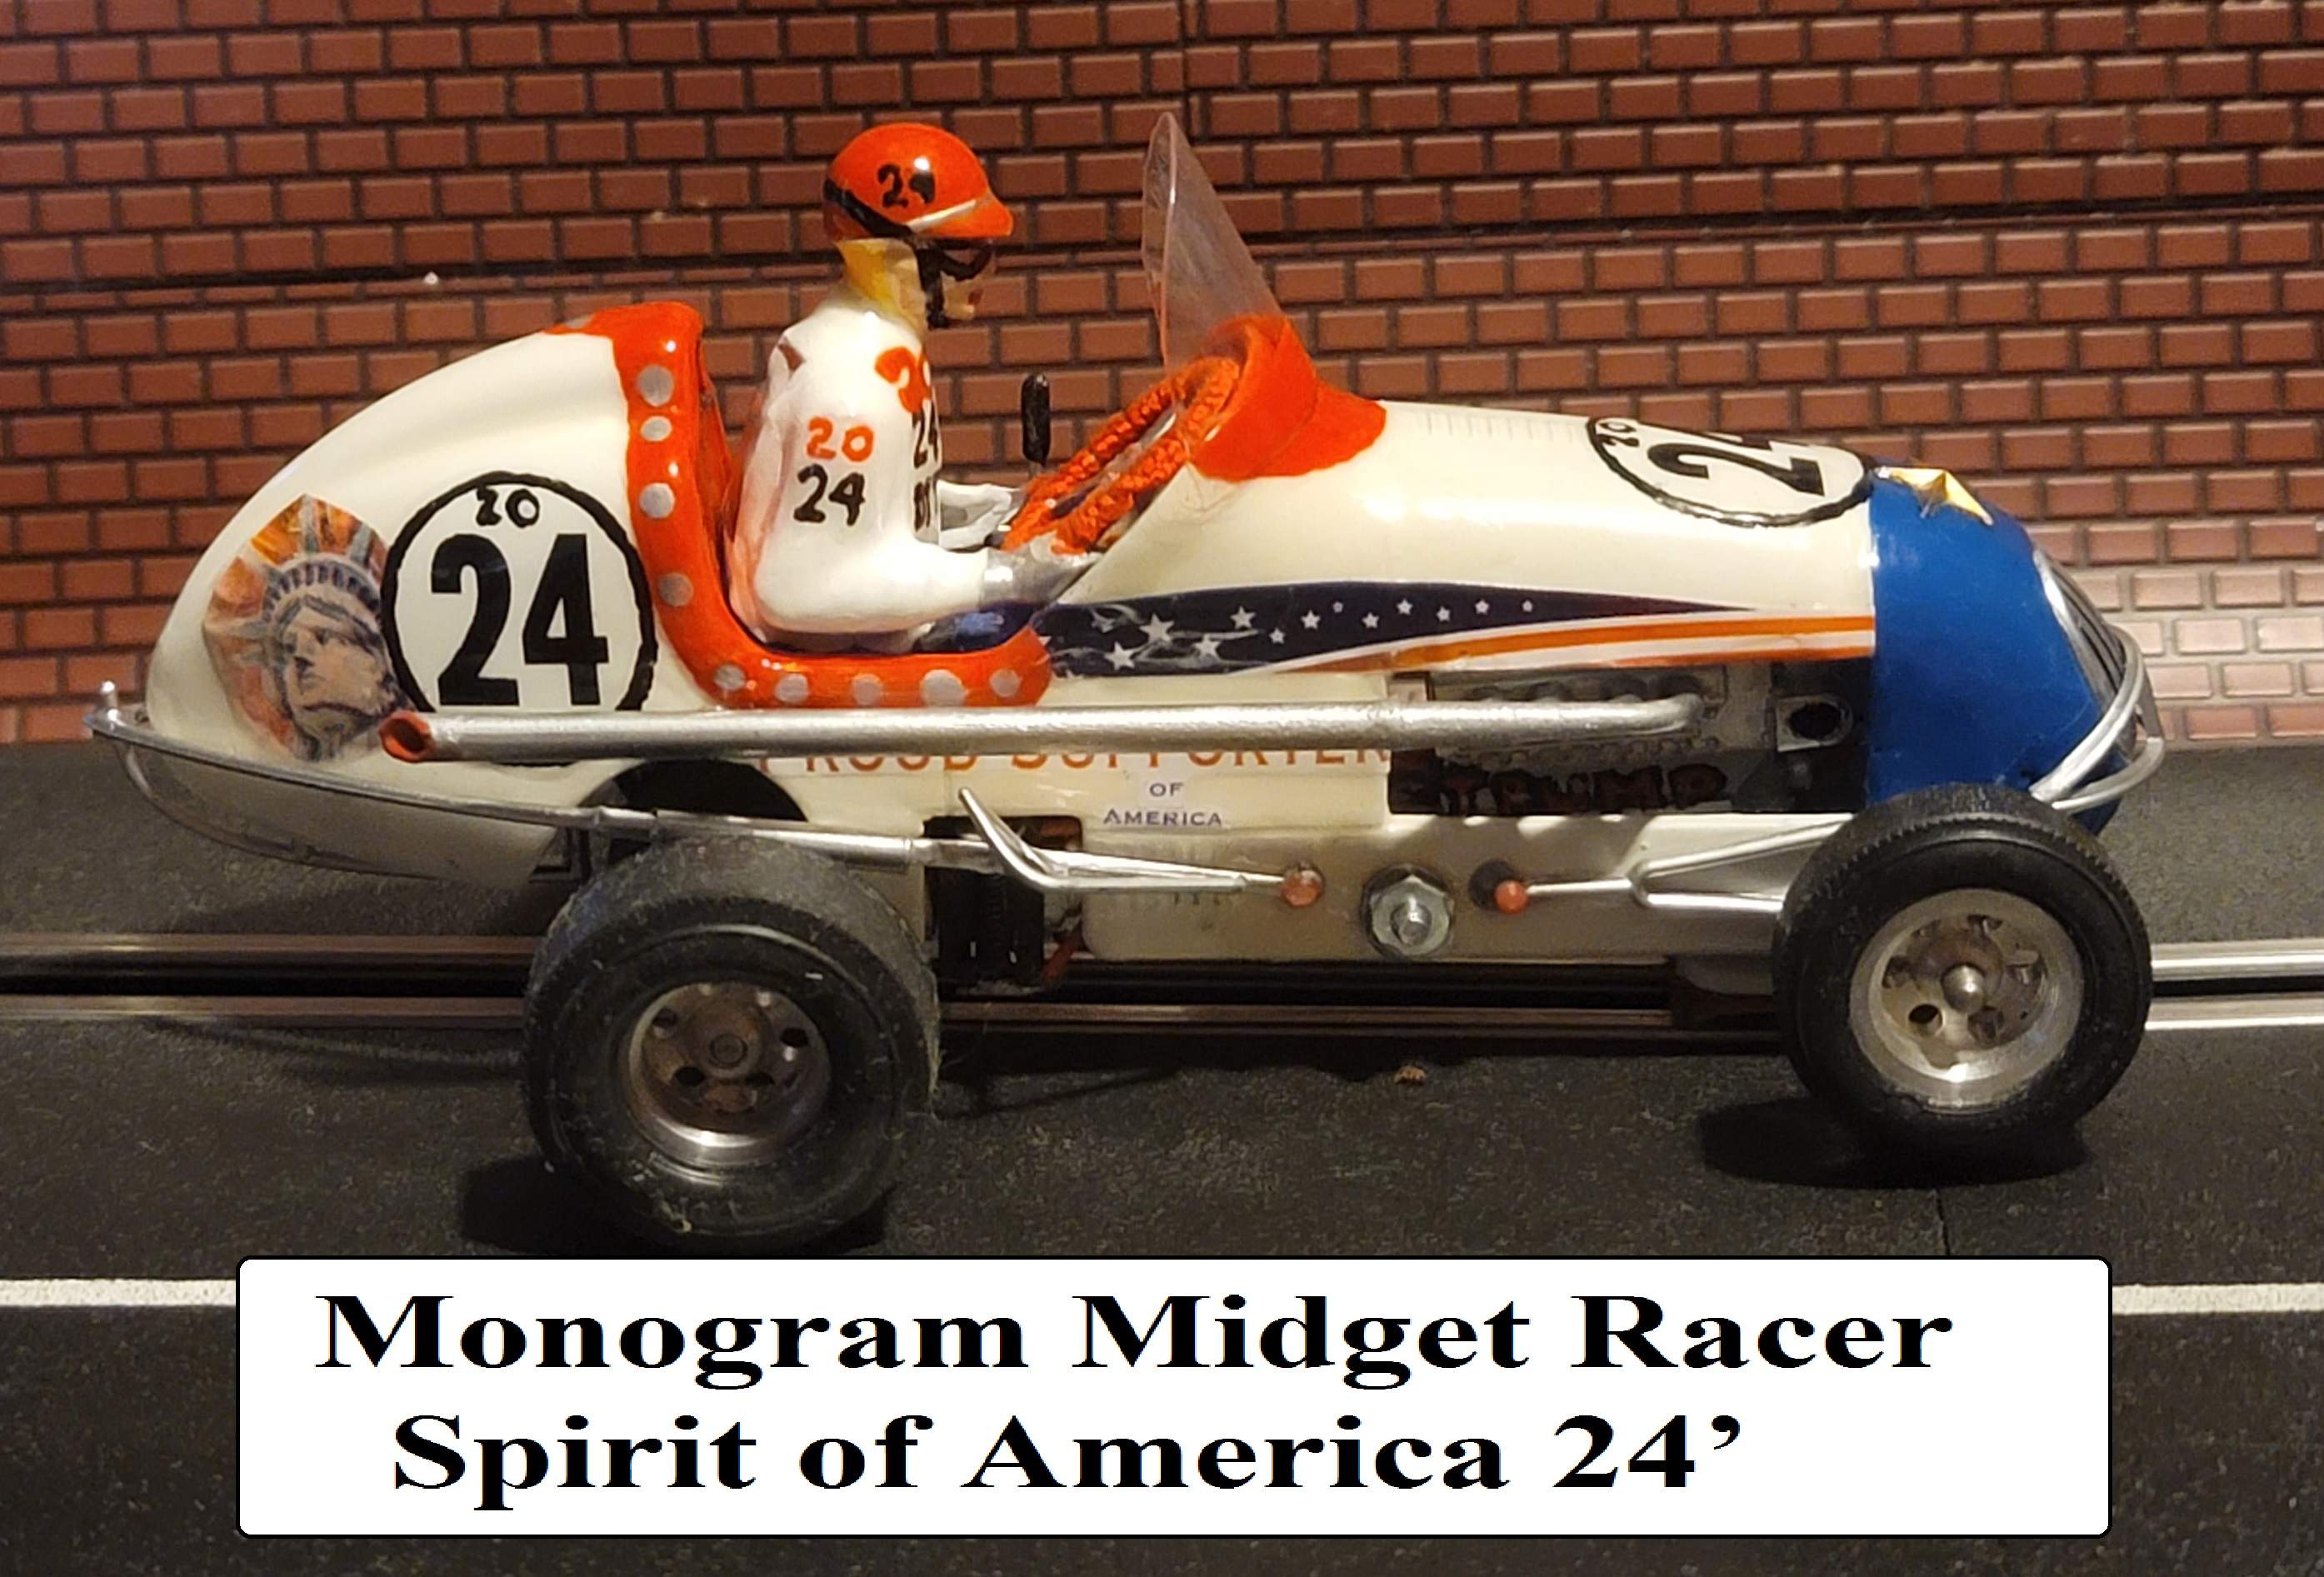 * SOLD - 11-22-23 * * Black Friday Super Sale, Save $50 off our Ebay $299 Store Sale Price * Monogram Midget Racer “Spirit of America 24'” Racing Special 1/24 Scale Slot Car 24